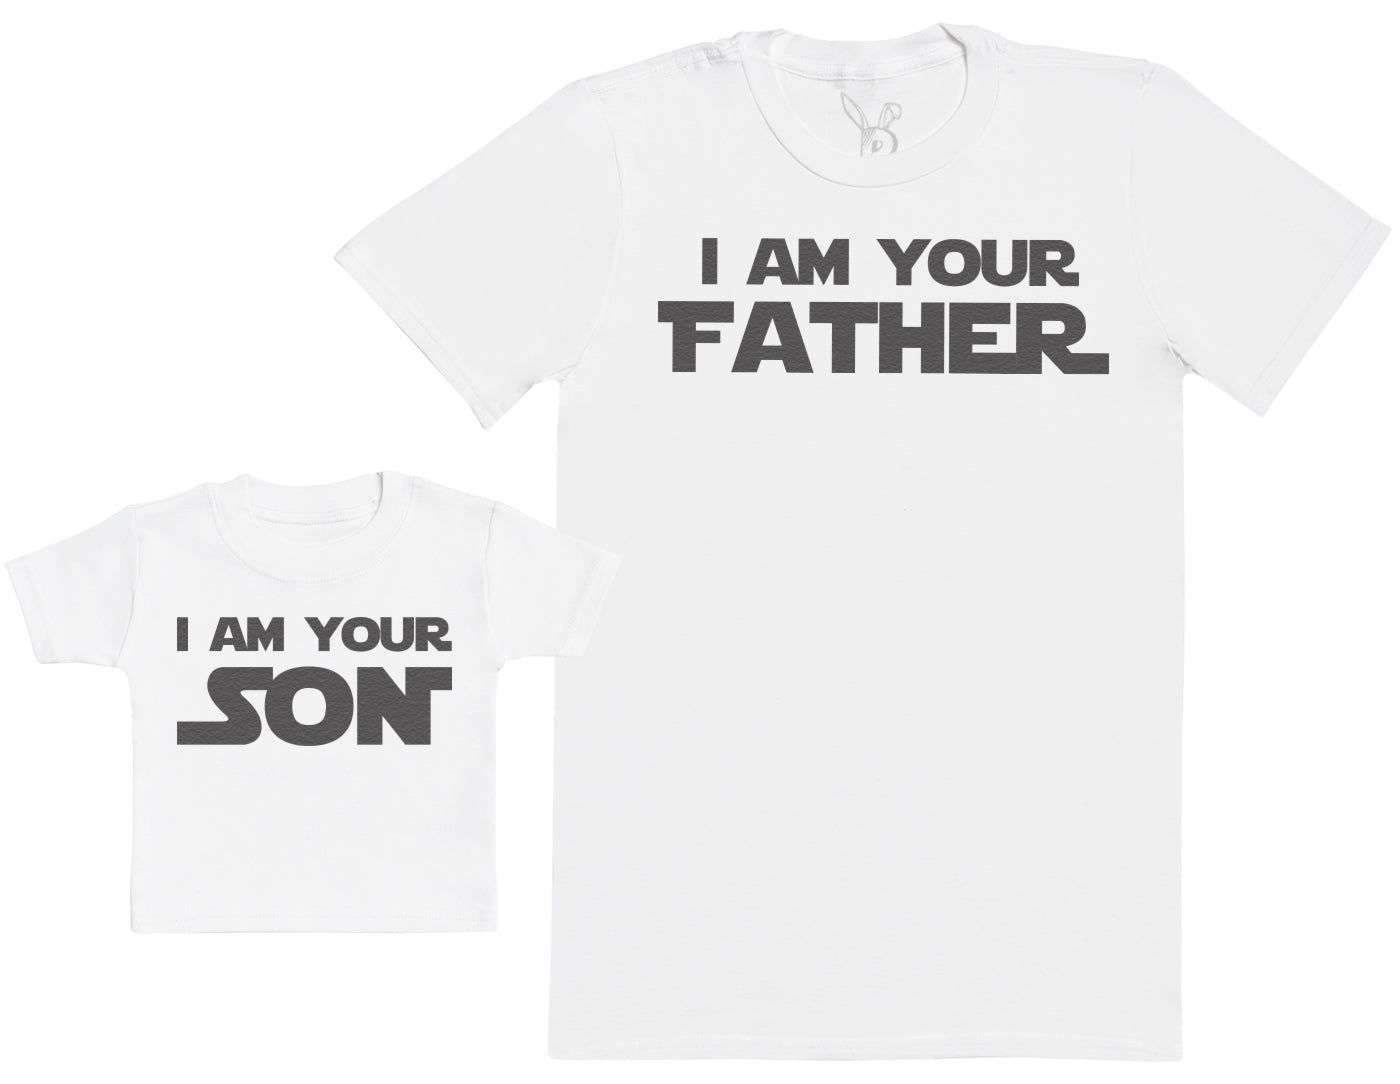 I Am Your Son I Am Your Father - Matching Set - Baby / Kids T-Shirt & Dad T-Shirt - (Sold Separately)